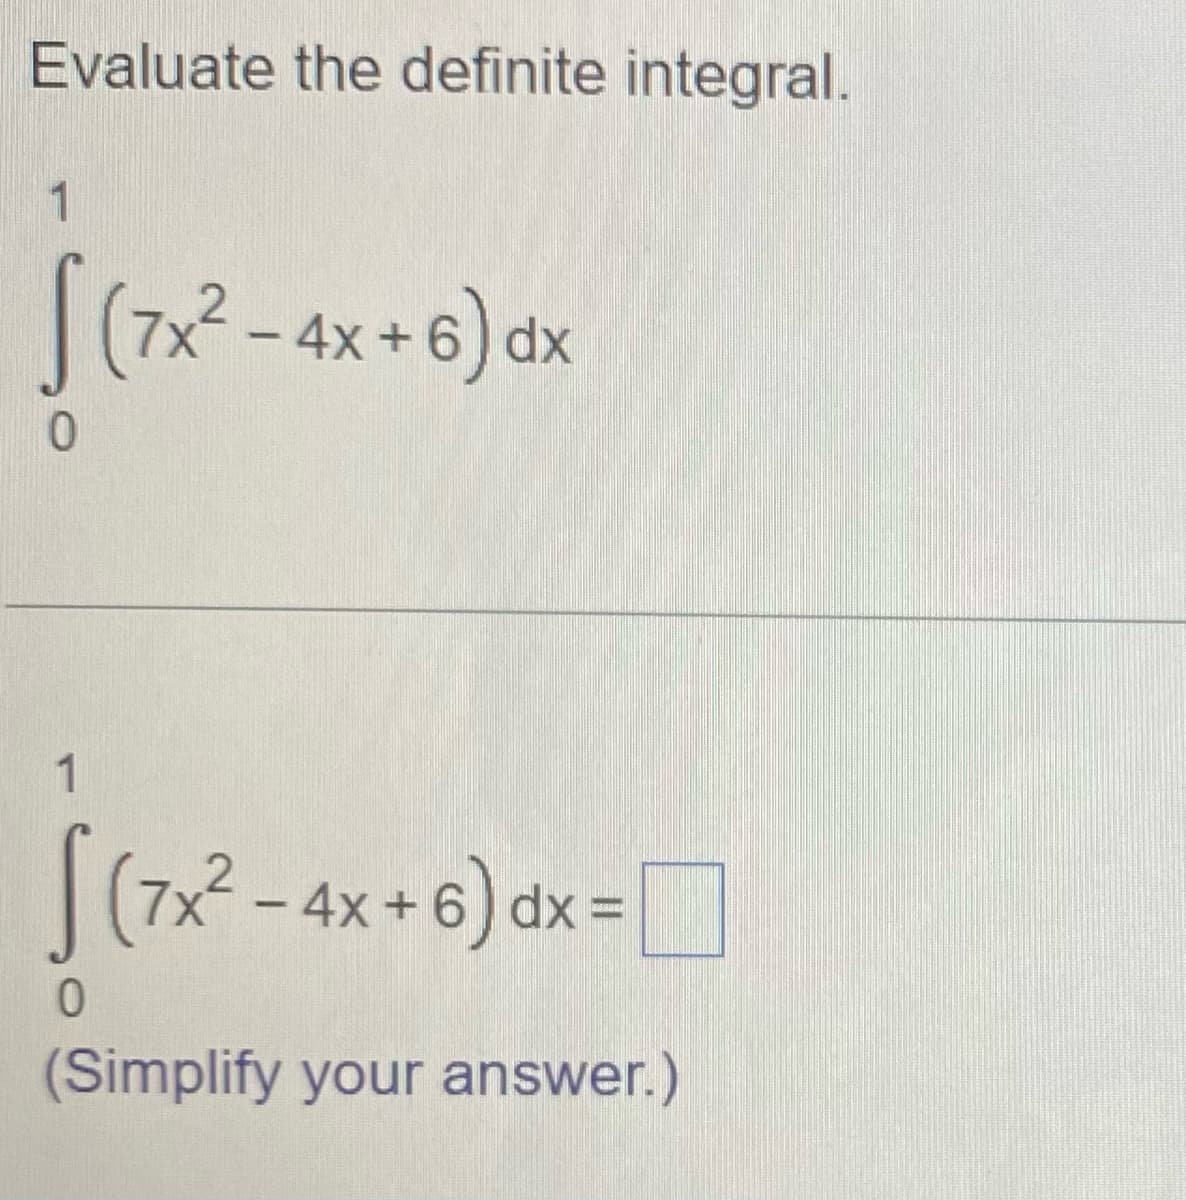 Evaluate the definite integral.
1
|(7x - 4x+6) dx
0.
[(72-ax+6) dx= ]
0.
(Simplify your answer.)
